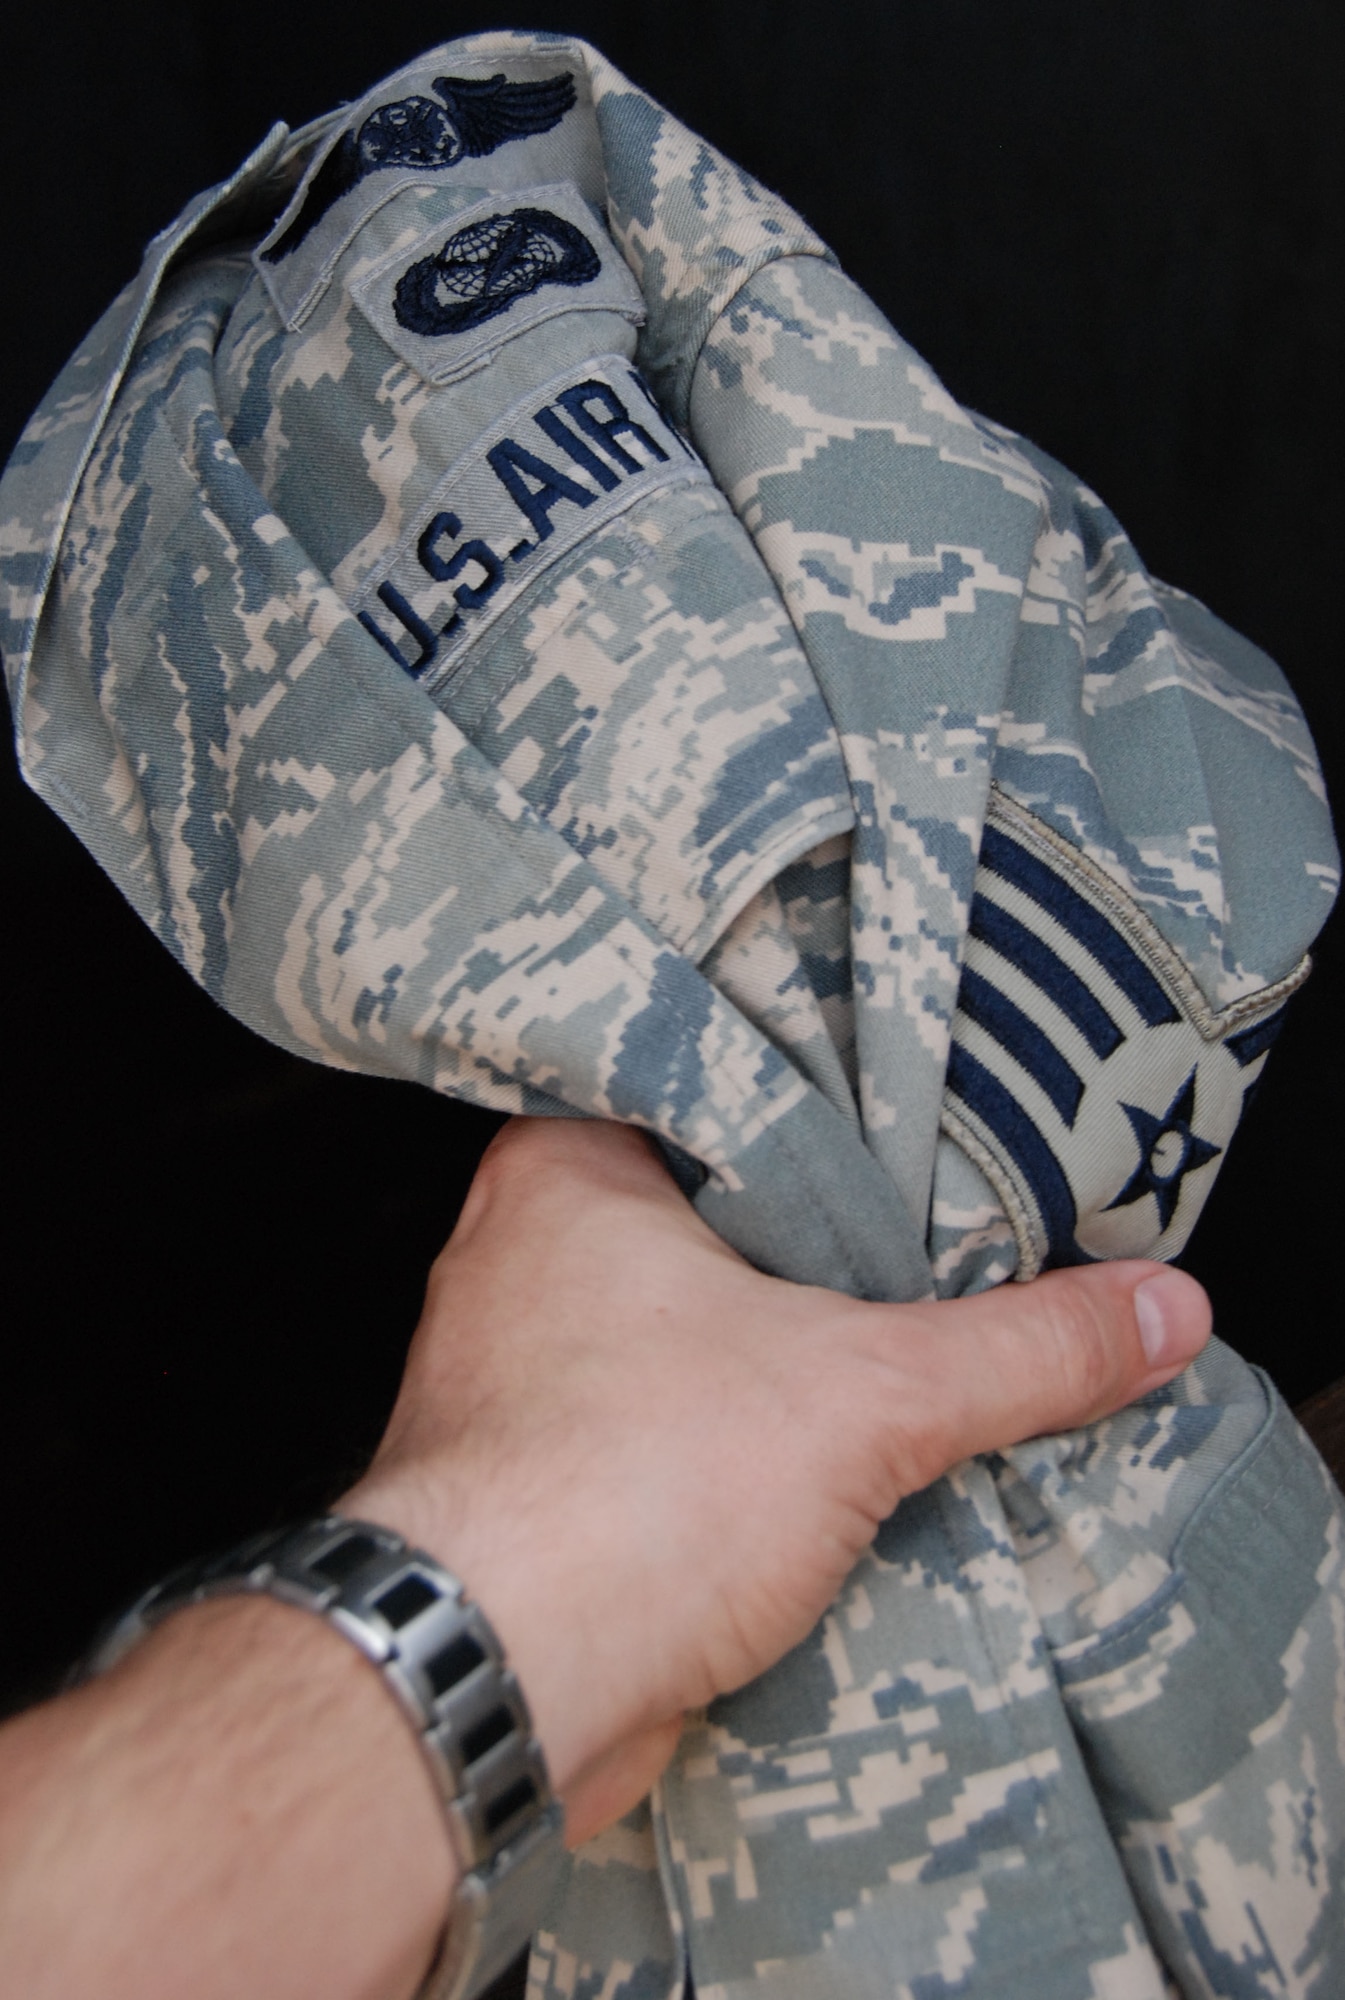 If a uniform is not donated, be sure to render it unserviceable before throwing it out.  Uniforms with rank, names or unit patches can be taken from garbage containers and used if not properly sanitized.  (U.S. Air Force photo illustration by Staff Sgt. Austin M. May)